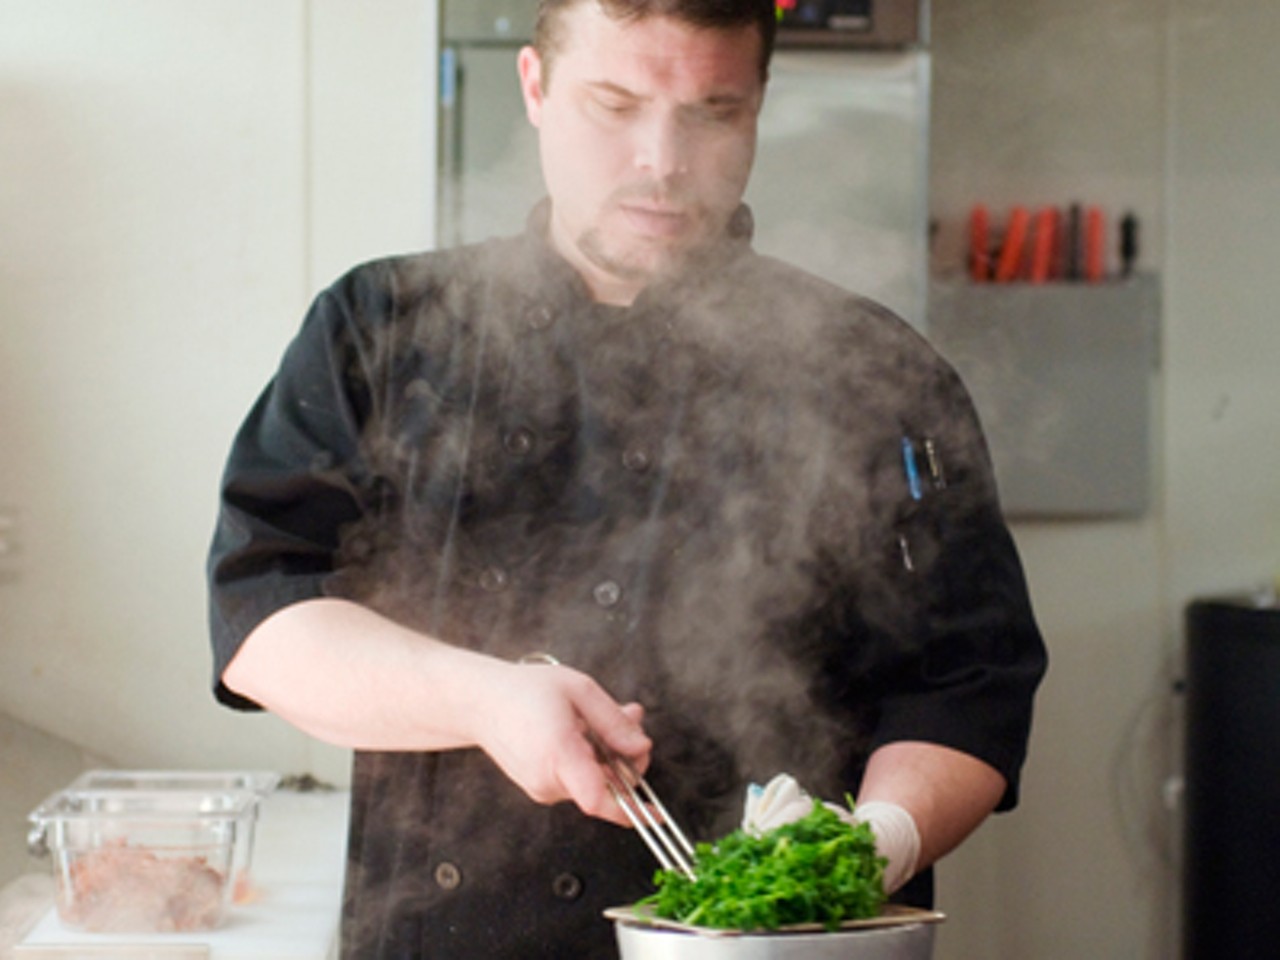 Chef Matthew Fazio with the blanched parsley. Read Ian Froeb's review: "Power Steering: Long a fixture across the river, Andria's Steakhouse opts for westward expansion."